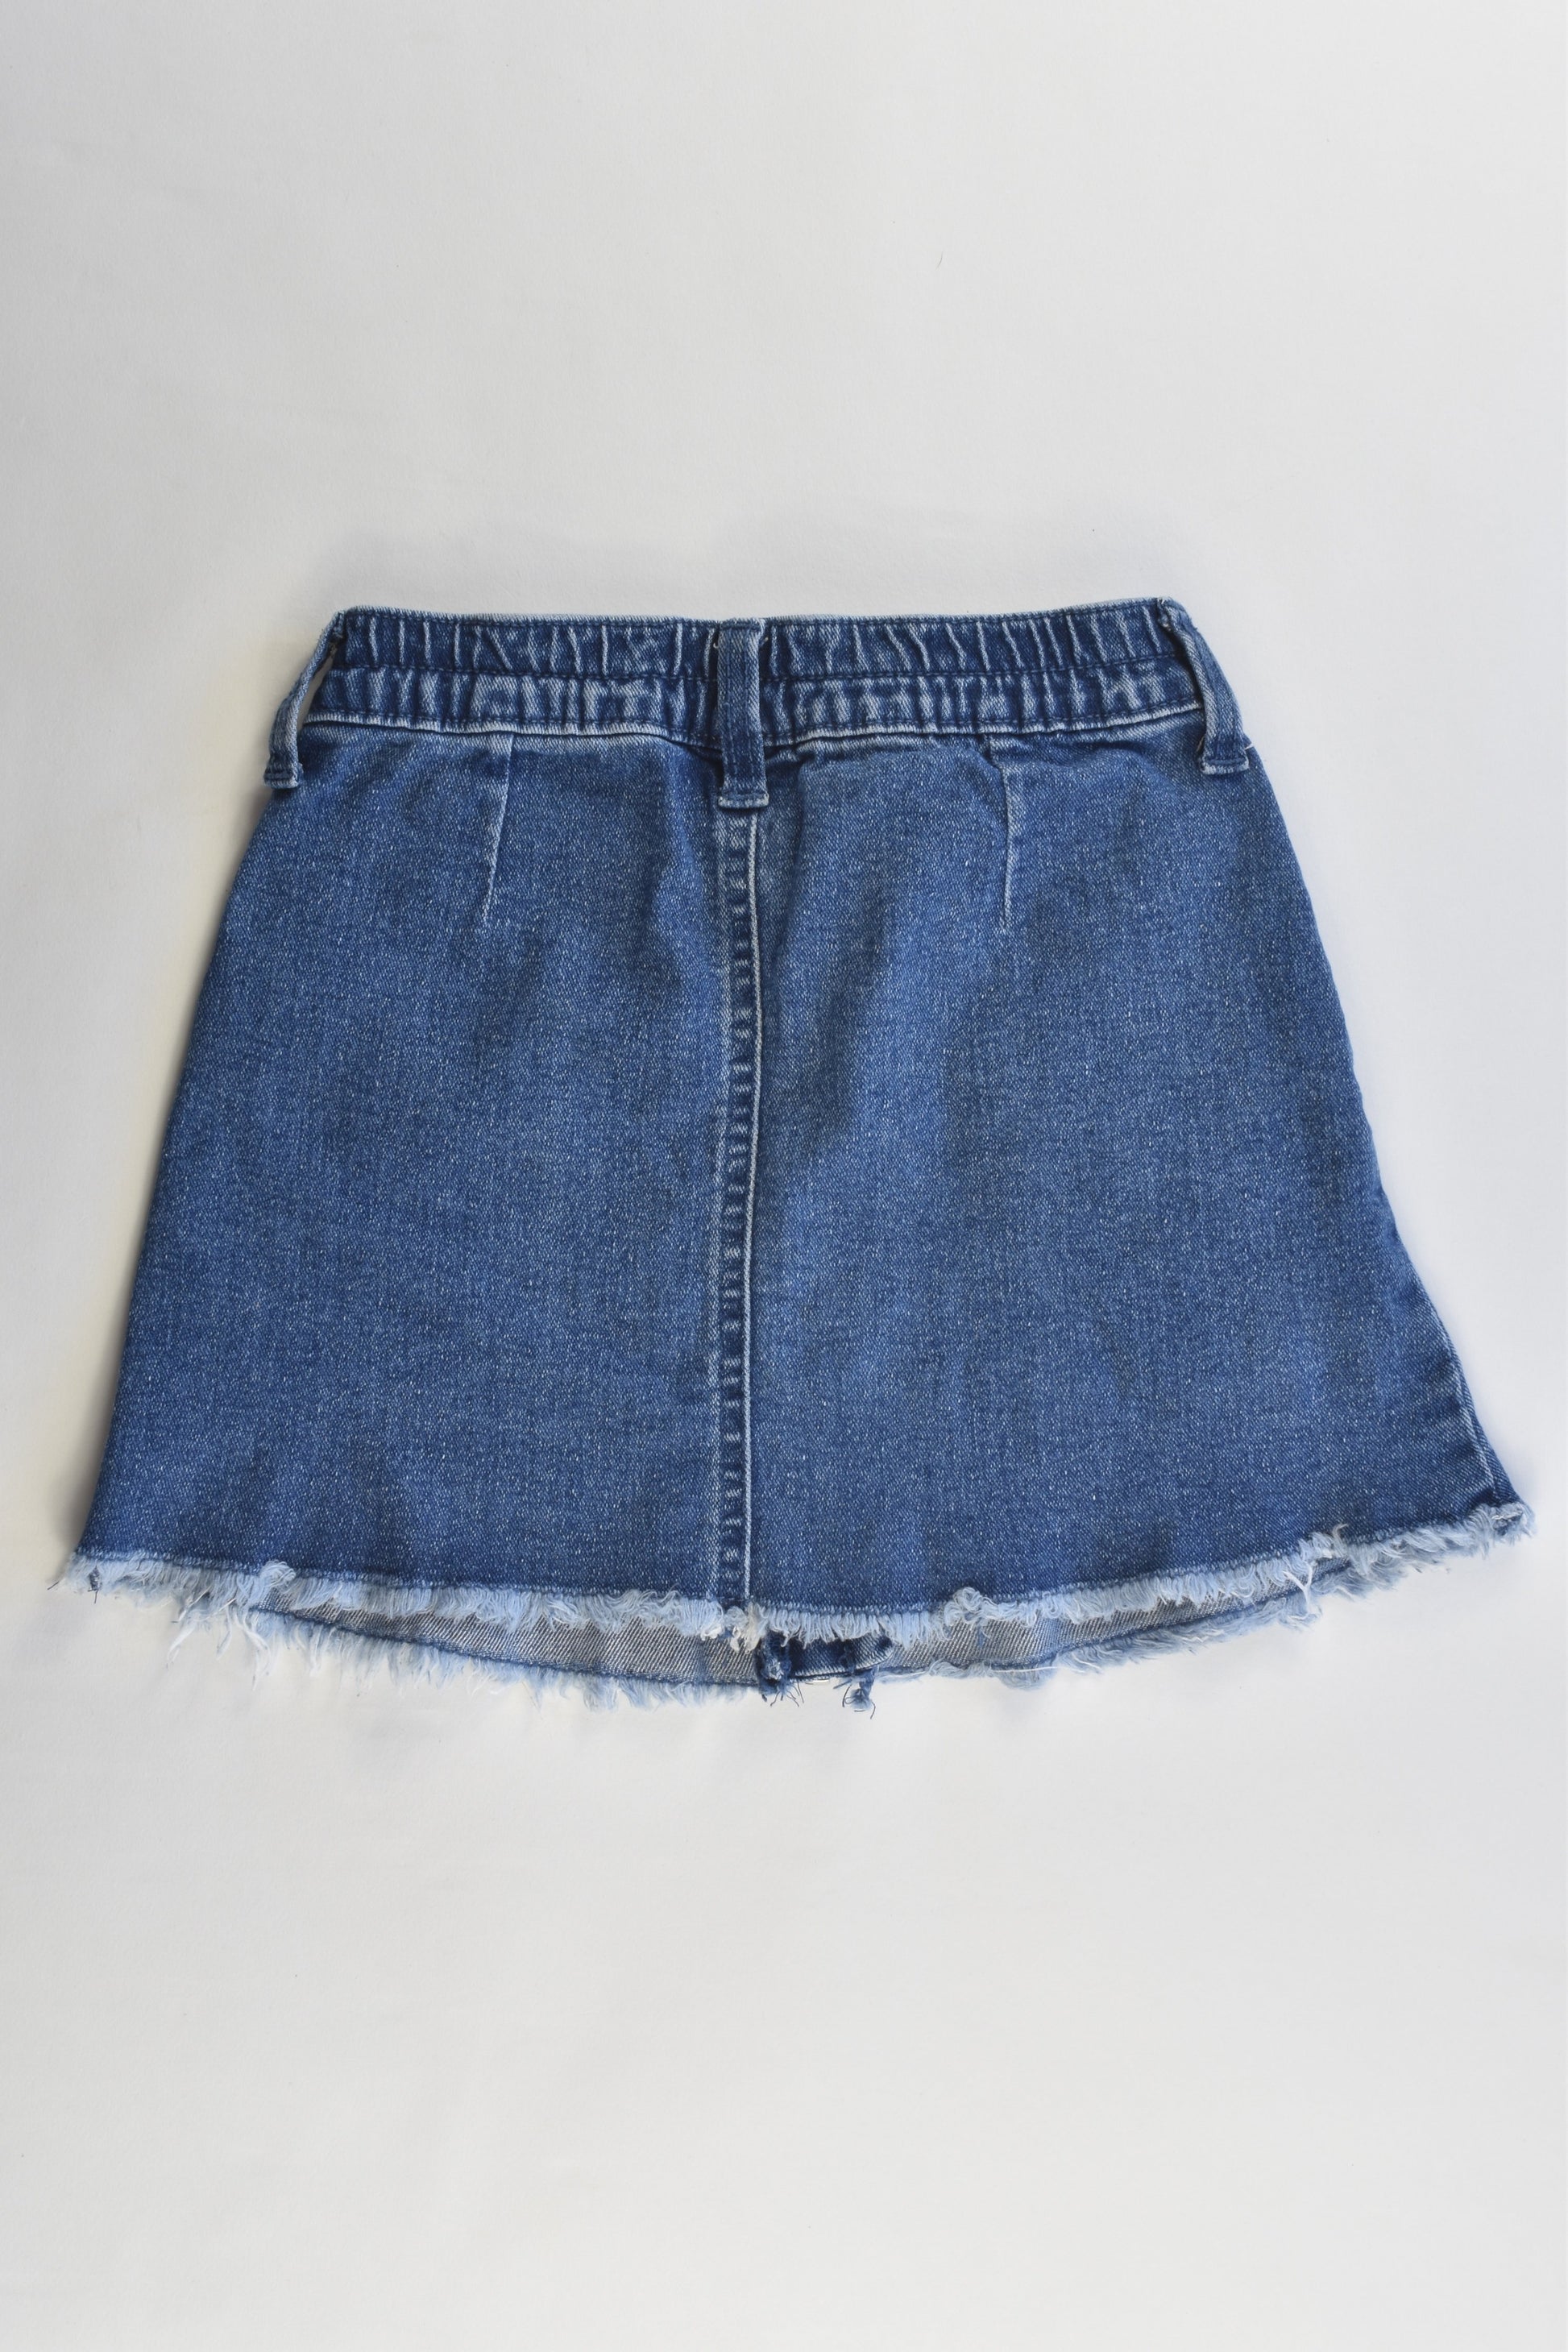 H&T Size 5 Stretchy Denim Skirt with Emboidery